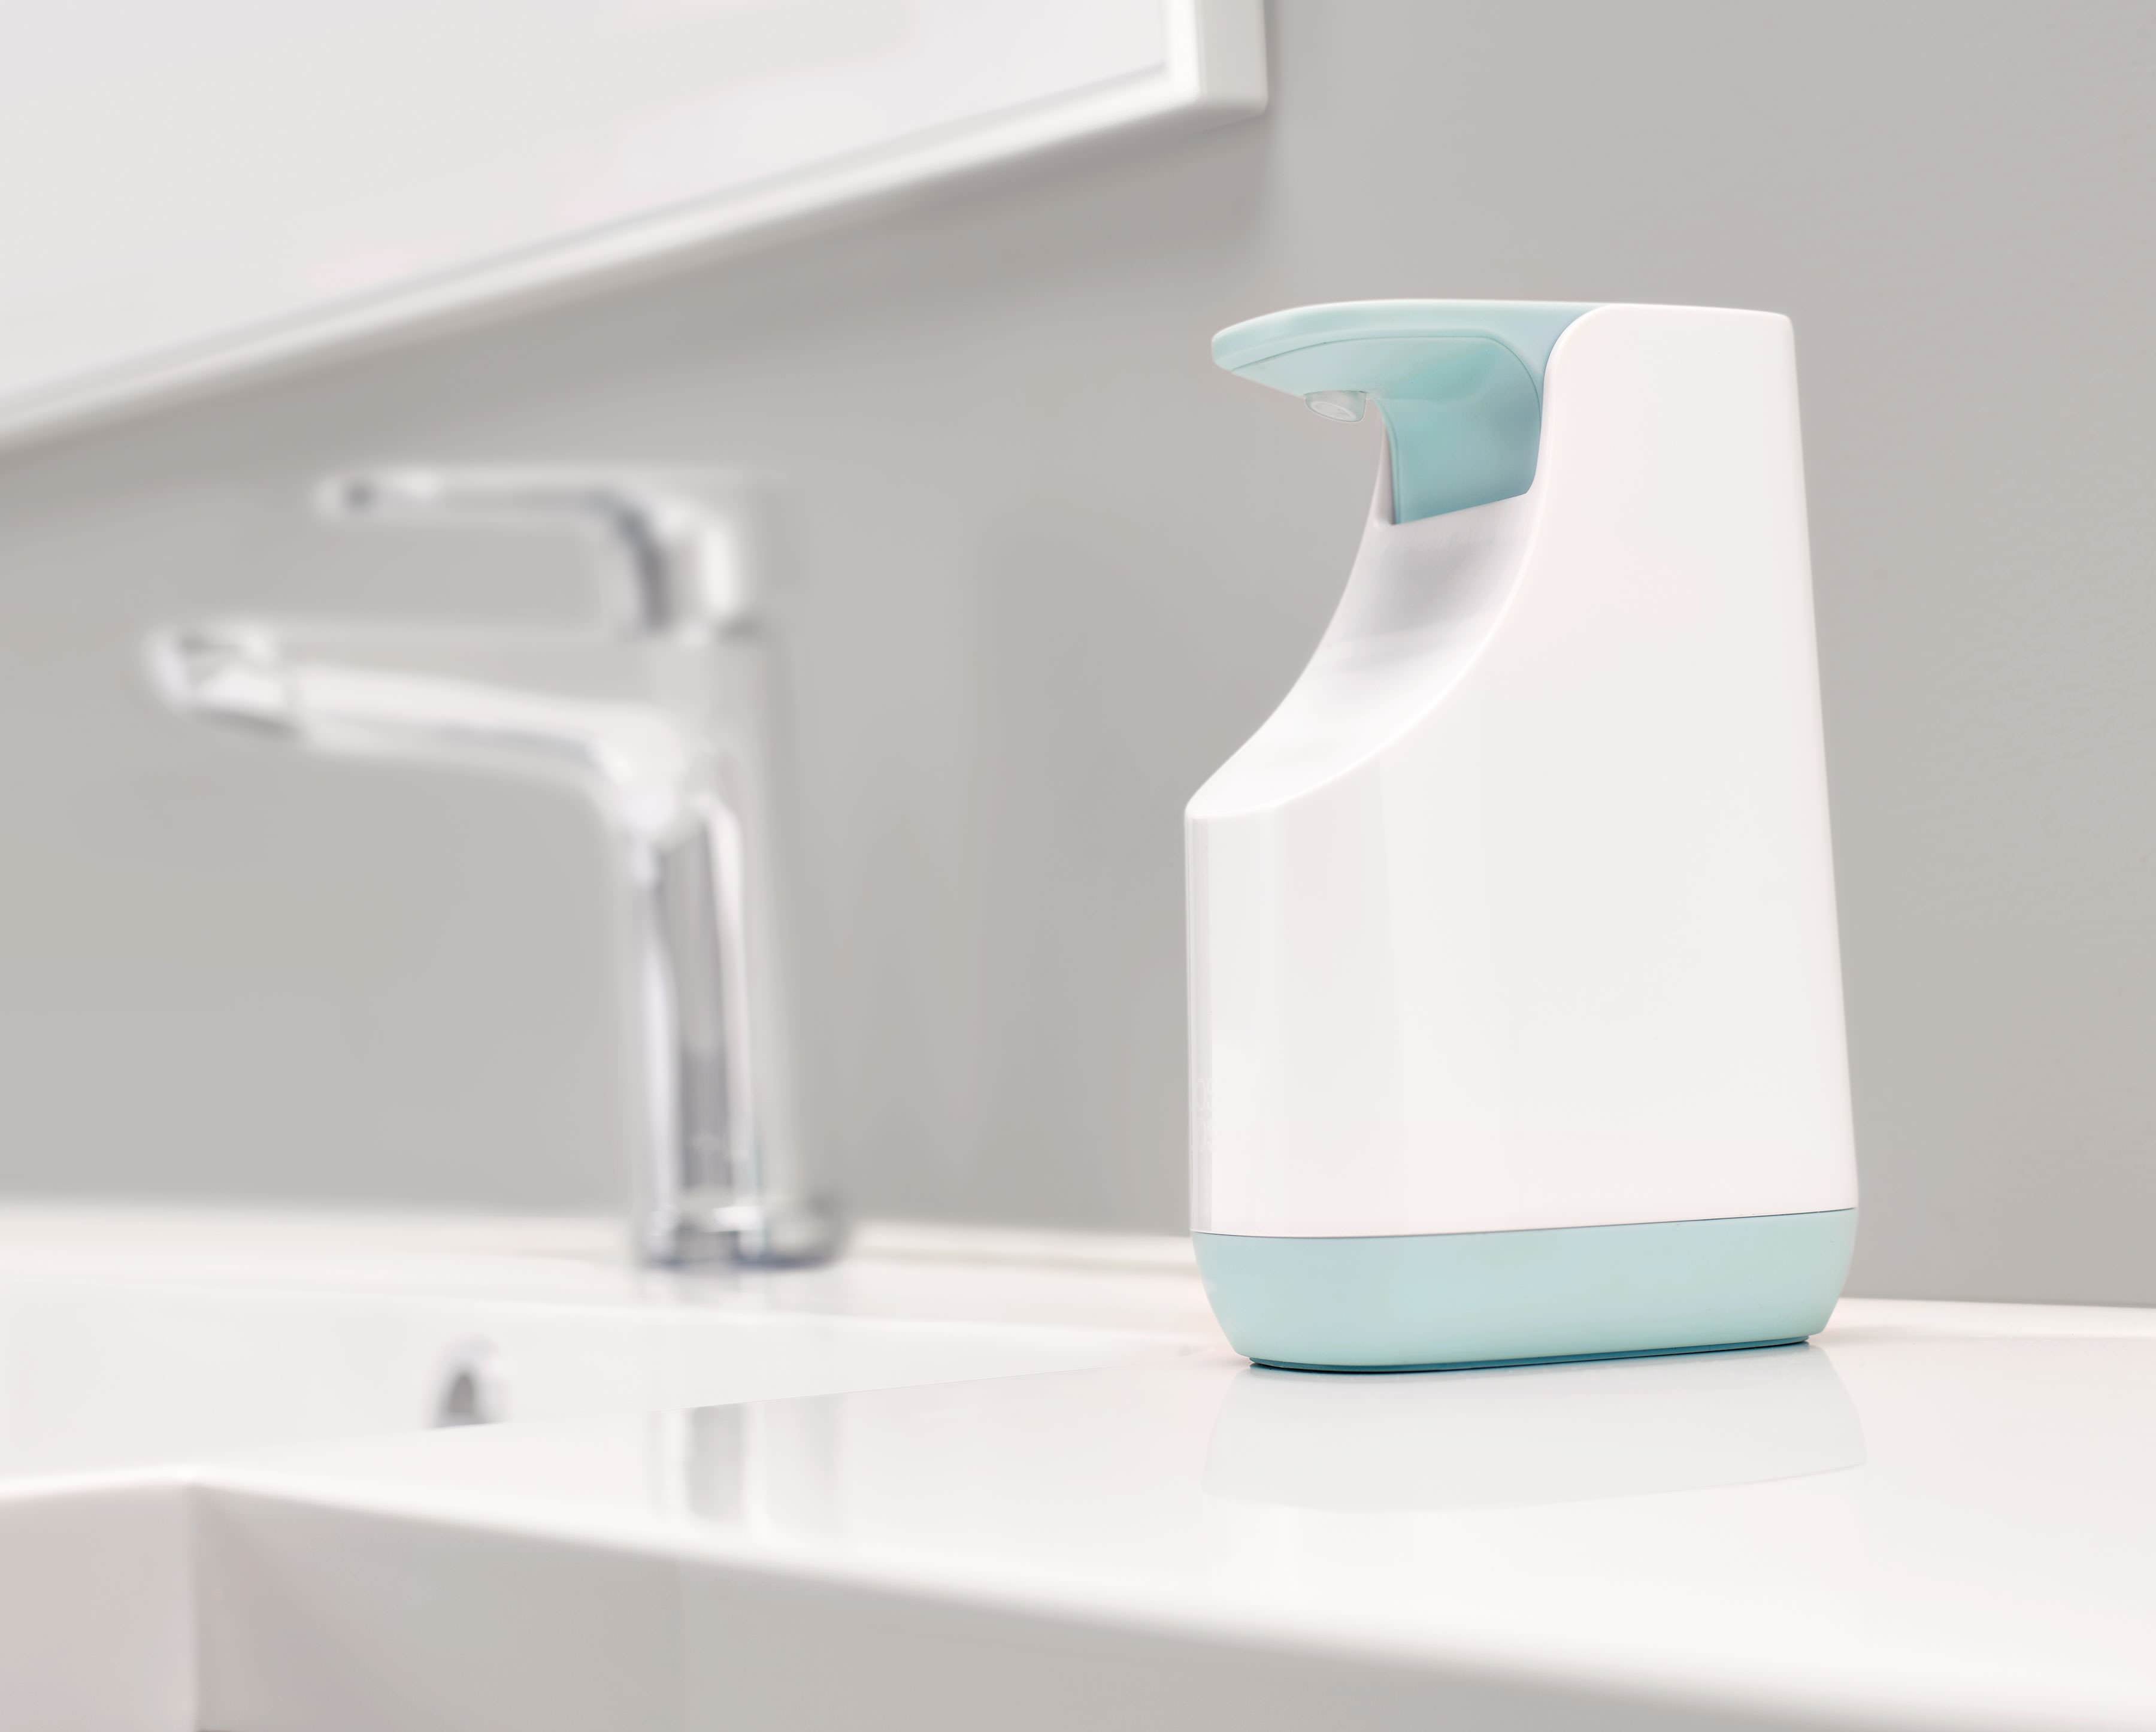 BEON.COM.AU  The narrow footprint of this soap pump means it takes up less room by your sink without compromising on capacity.  Slimline, space-saving design Fill-level window Large, easy-push pump head Non-drip nozzle Large capacity: 350ml (12.3 fl oz)  Specifications Care & use:  Wash and dry by hand B... Joseph Joseph at BEON.COM.AU